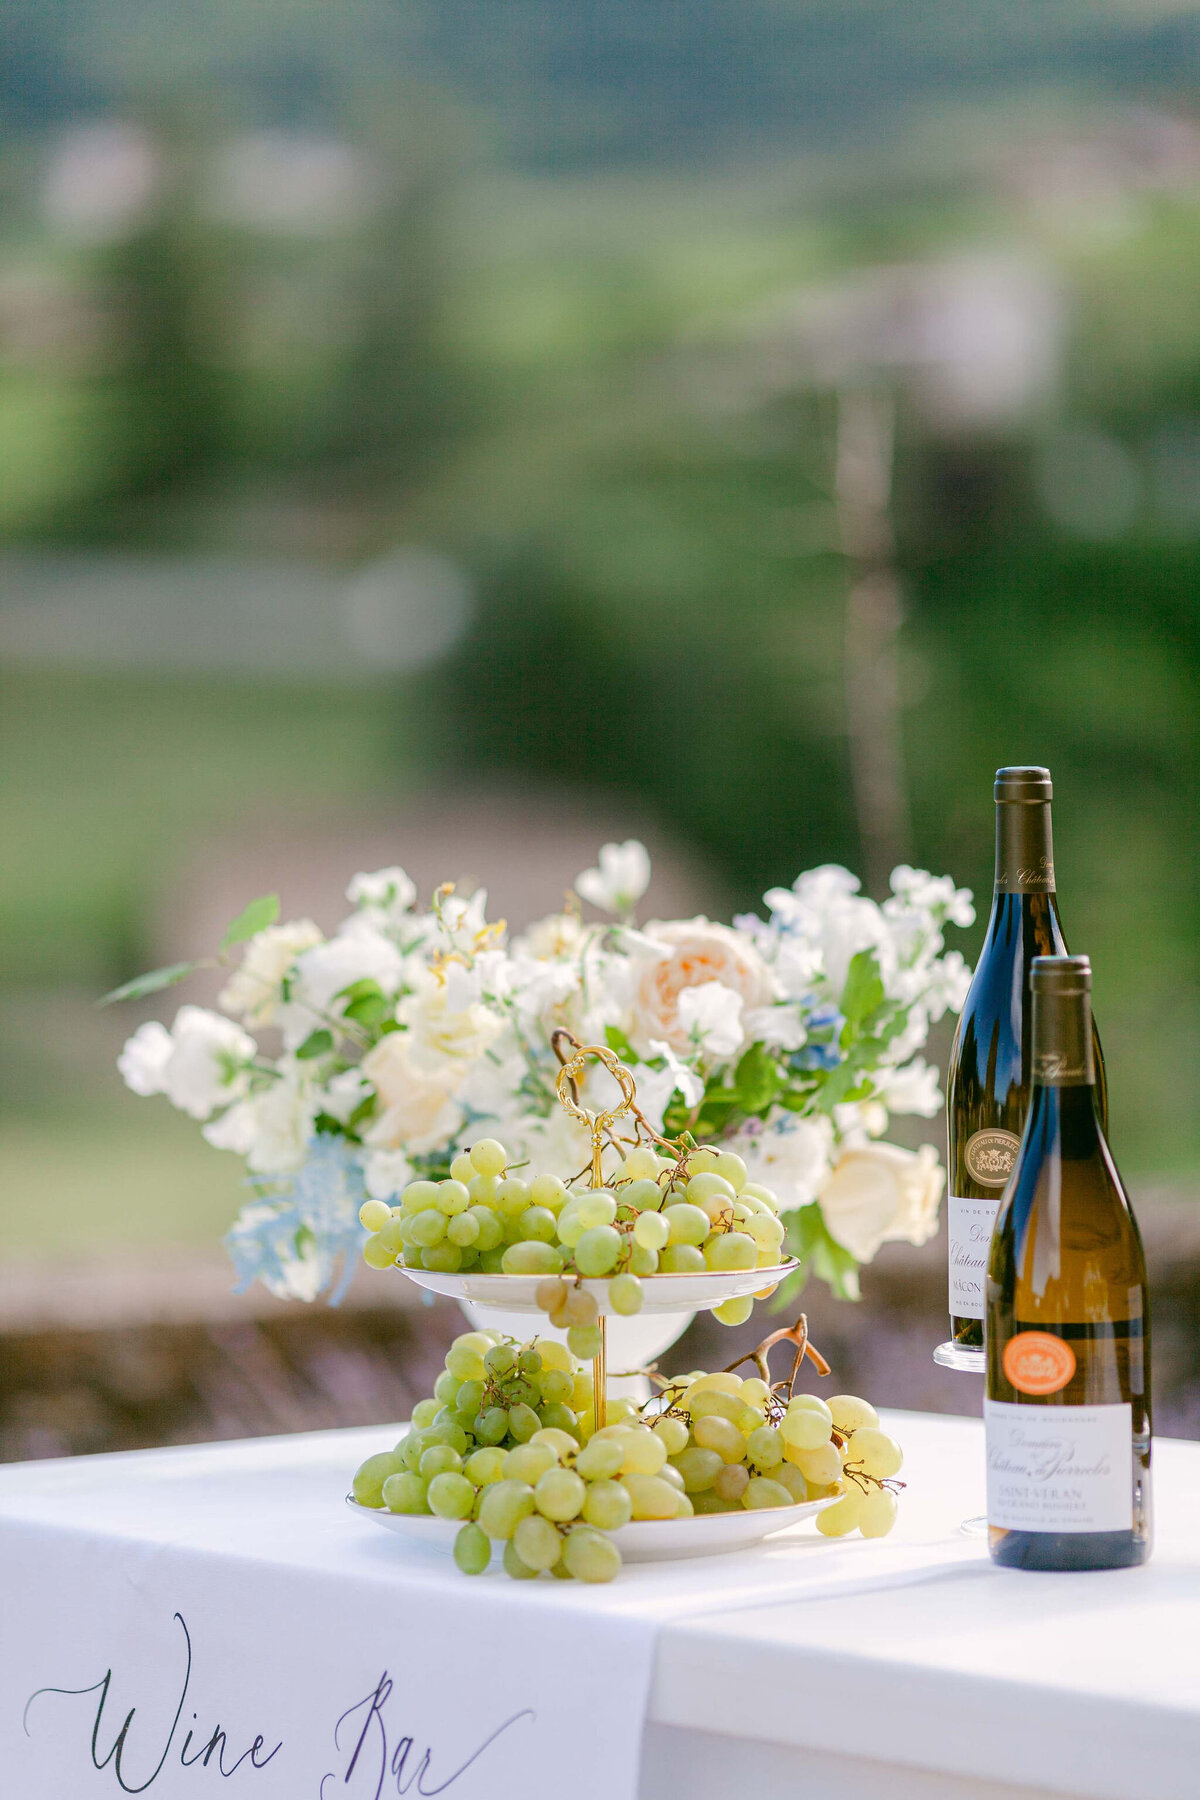 Château wedding surrounded by the fine vineyards of Burgundy